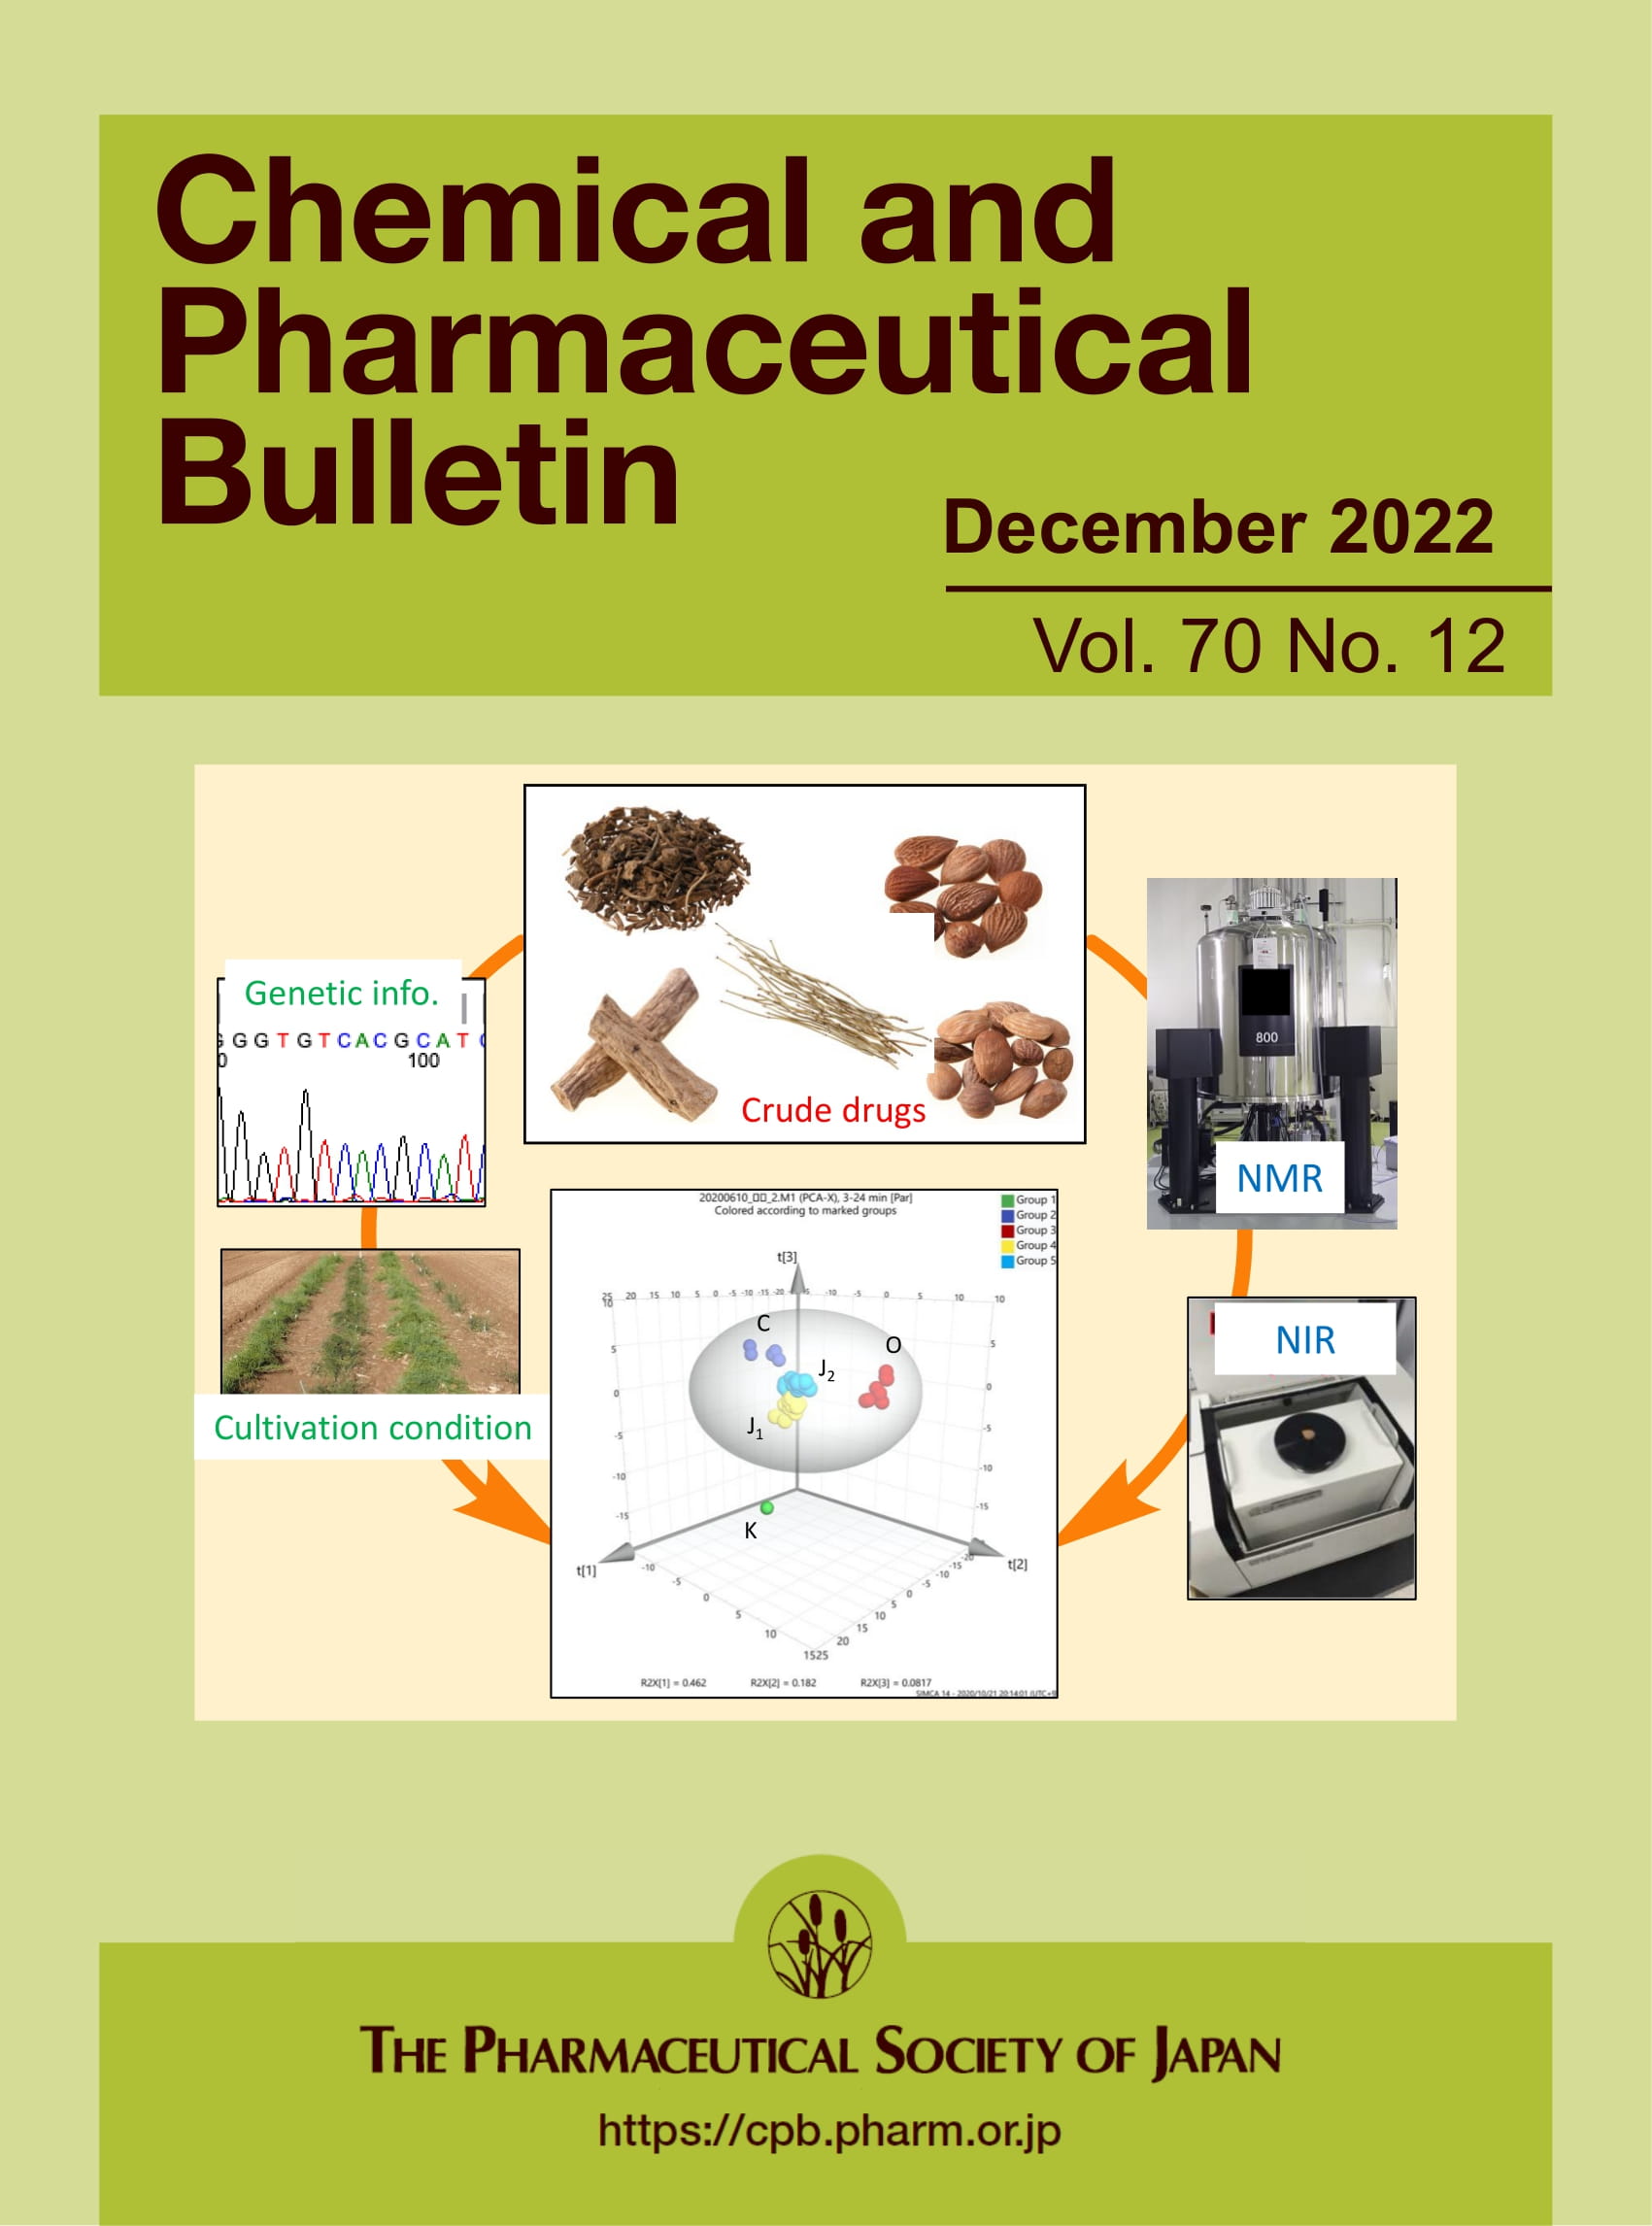 Biological and Pharmaceutical Bulletin